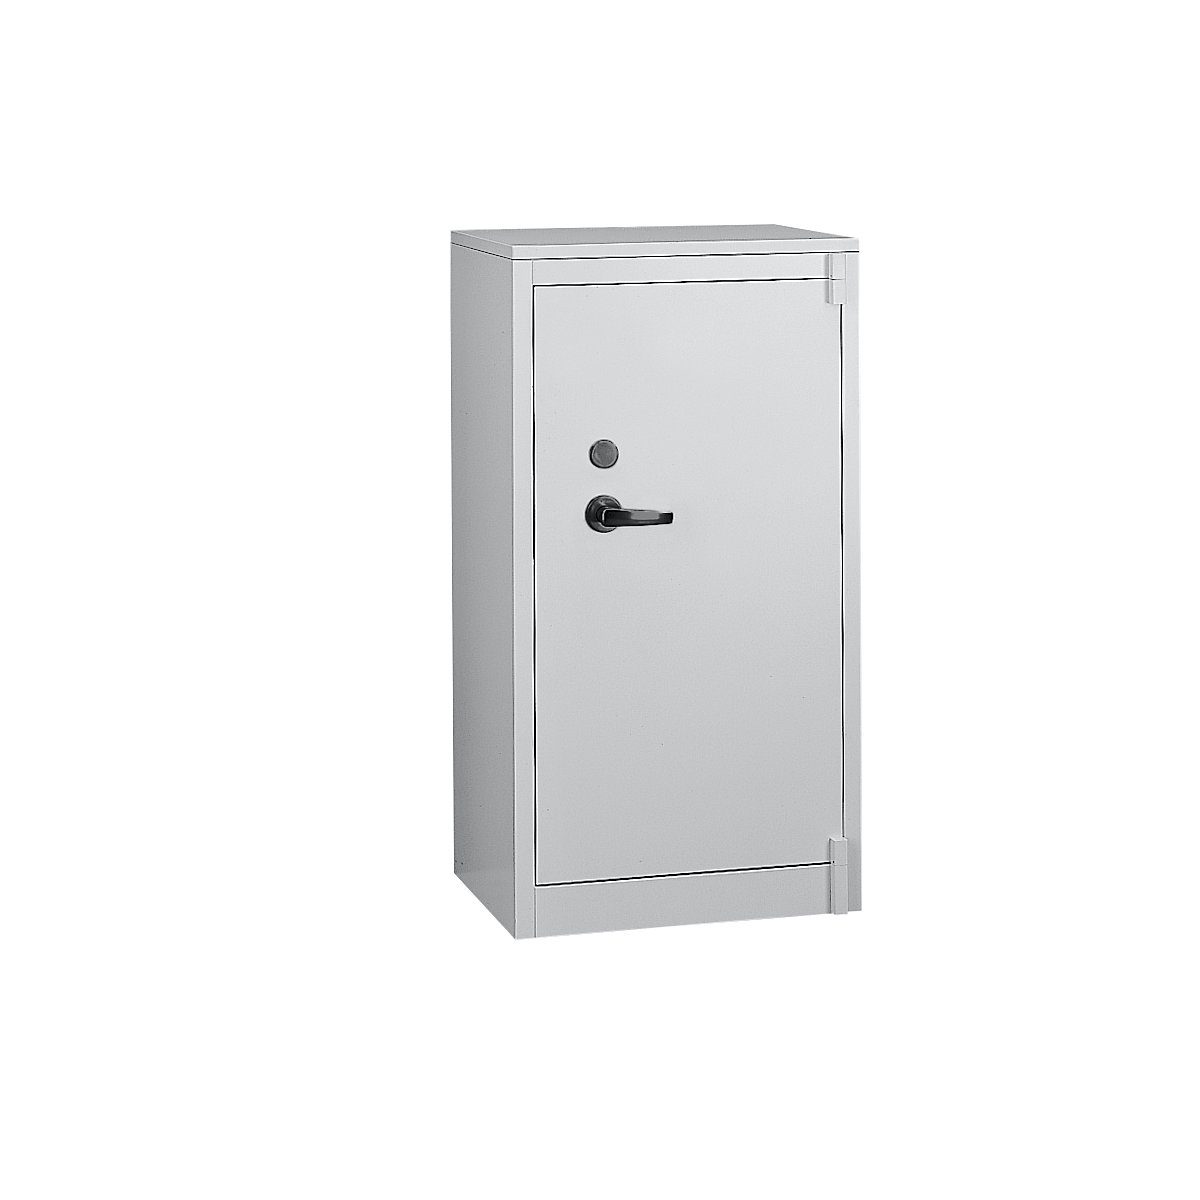 Steel cupboard with fire protection - C+P